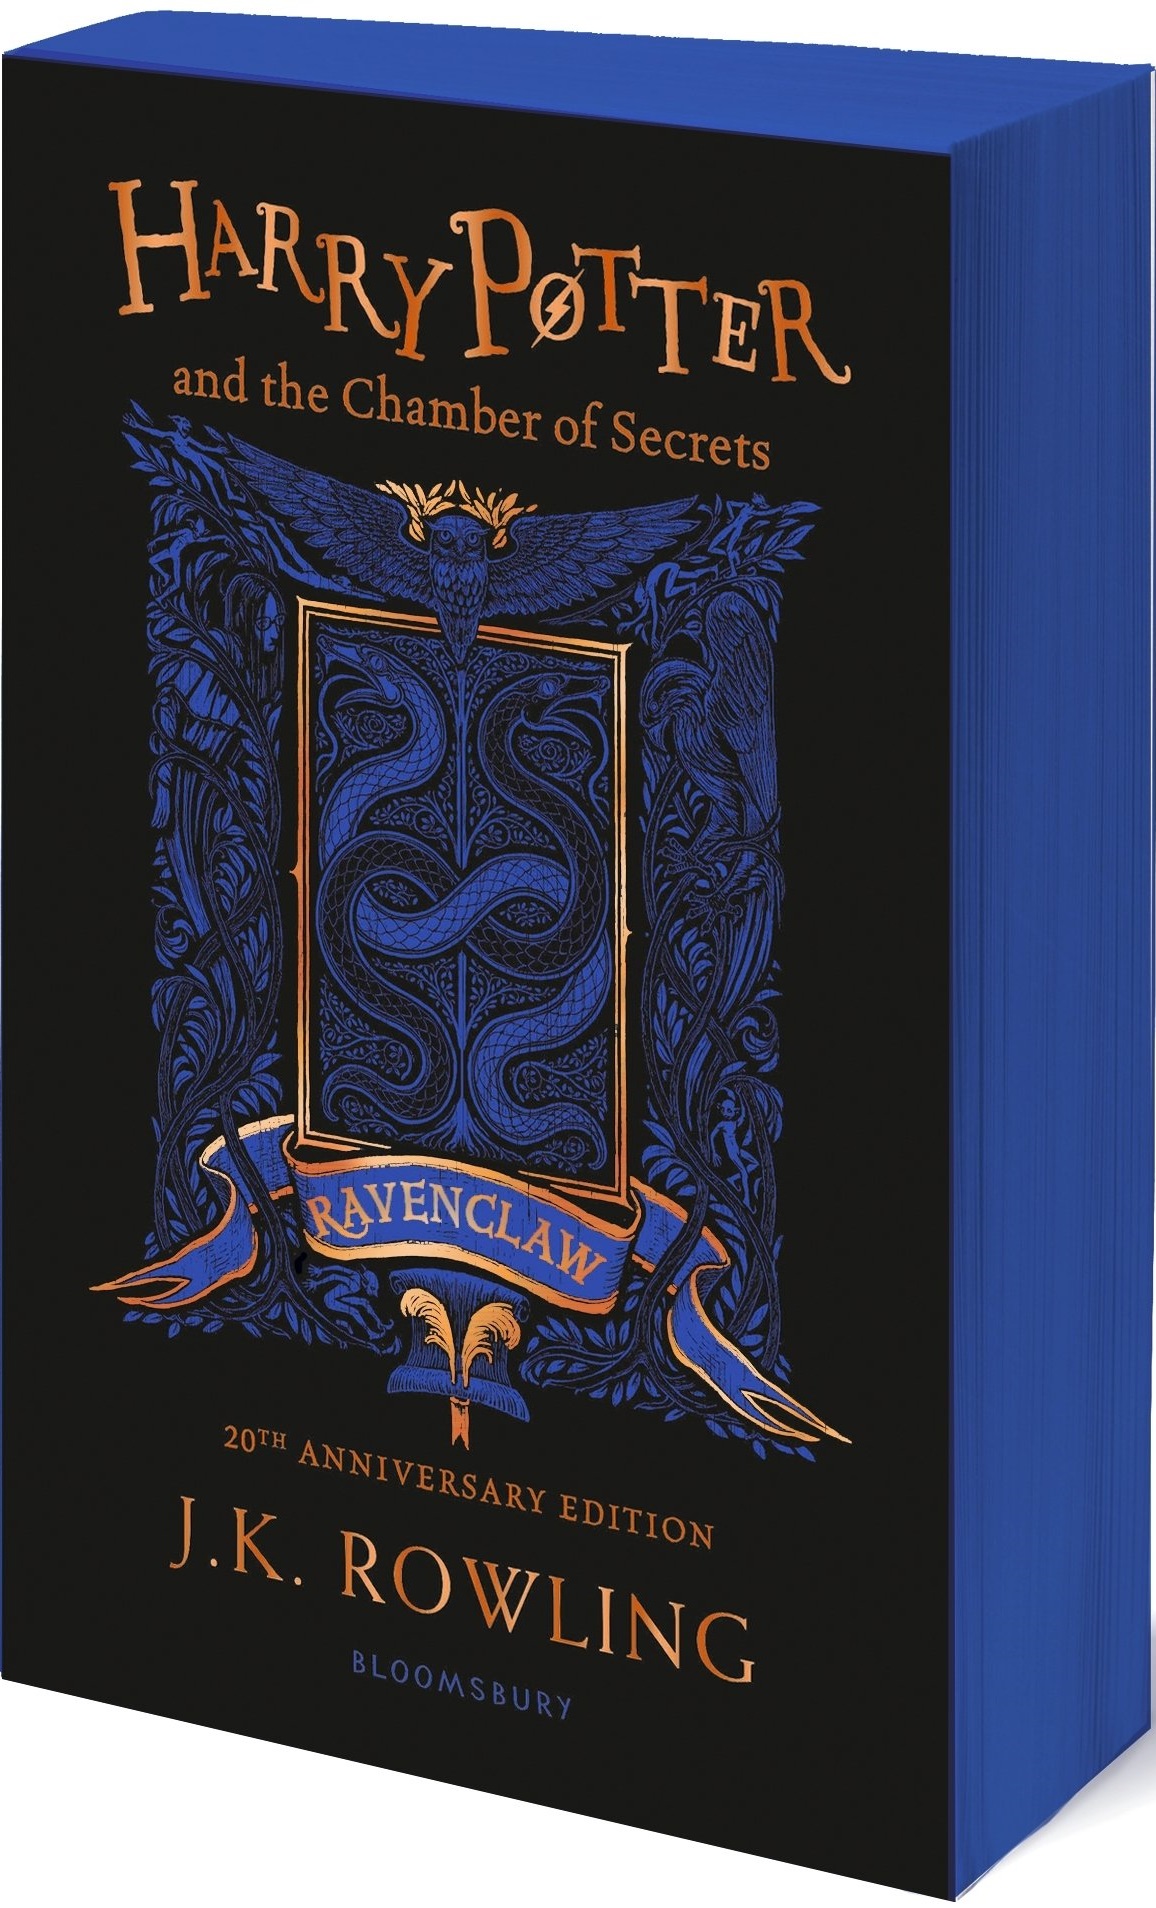 Harry Potter and the Chamber of Secrets – Ravenclaw Edition | J.K. Rowling